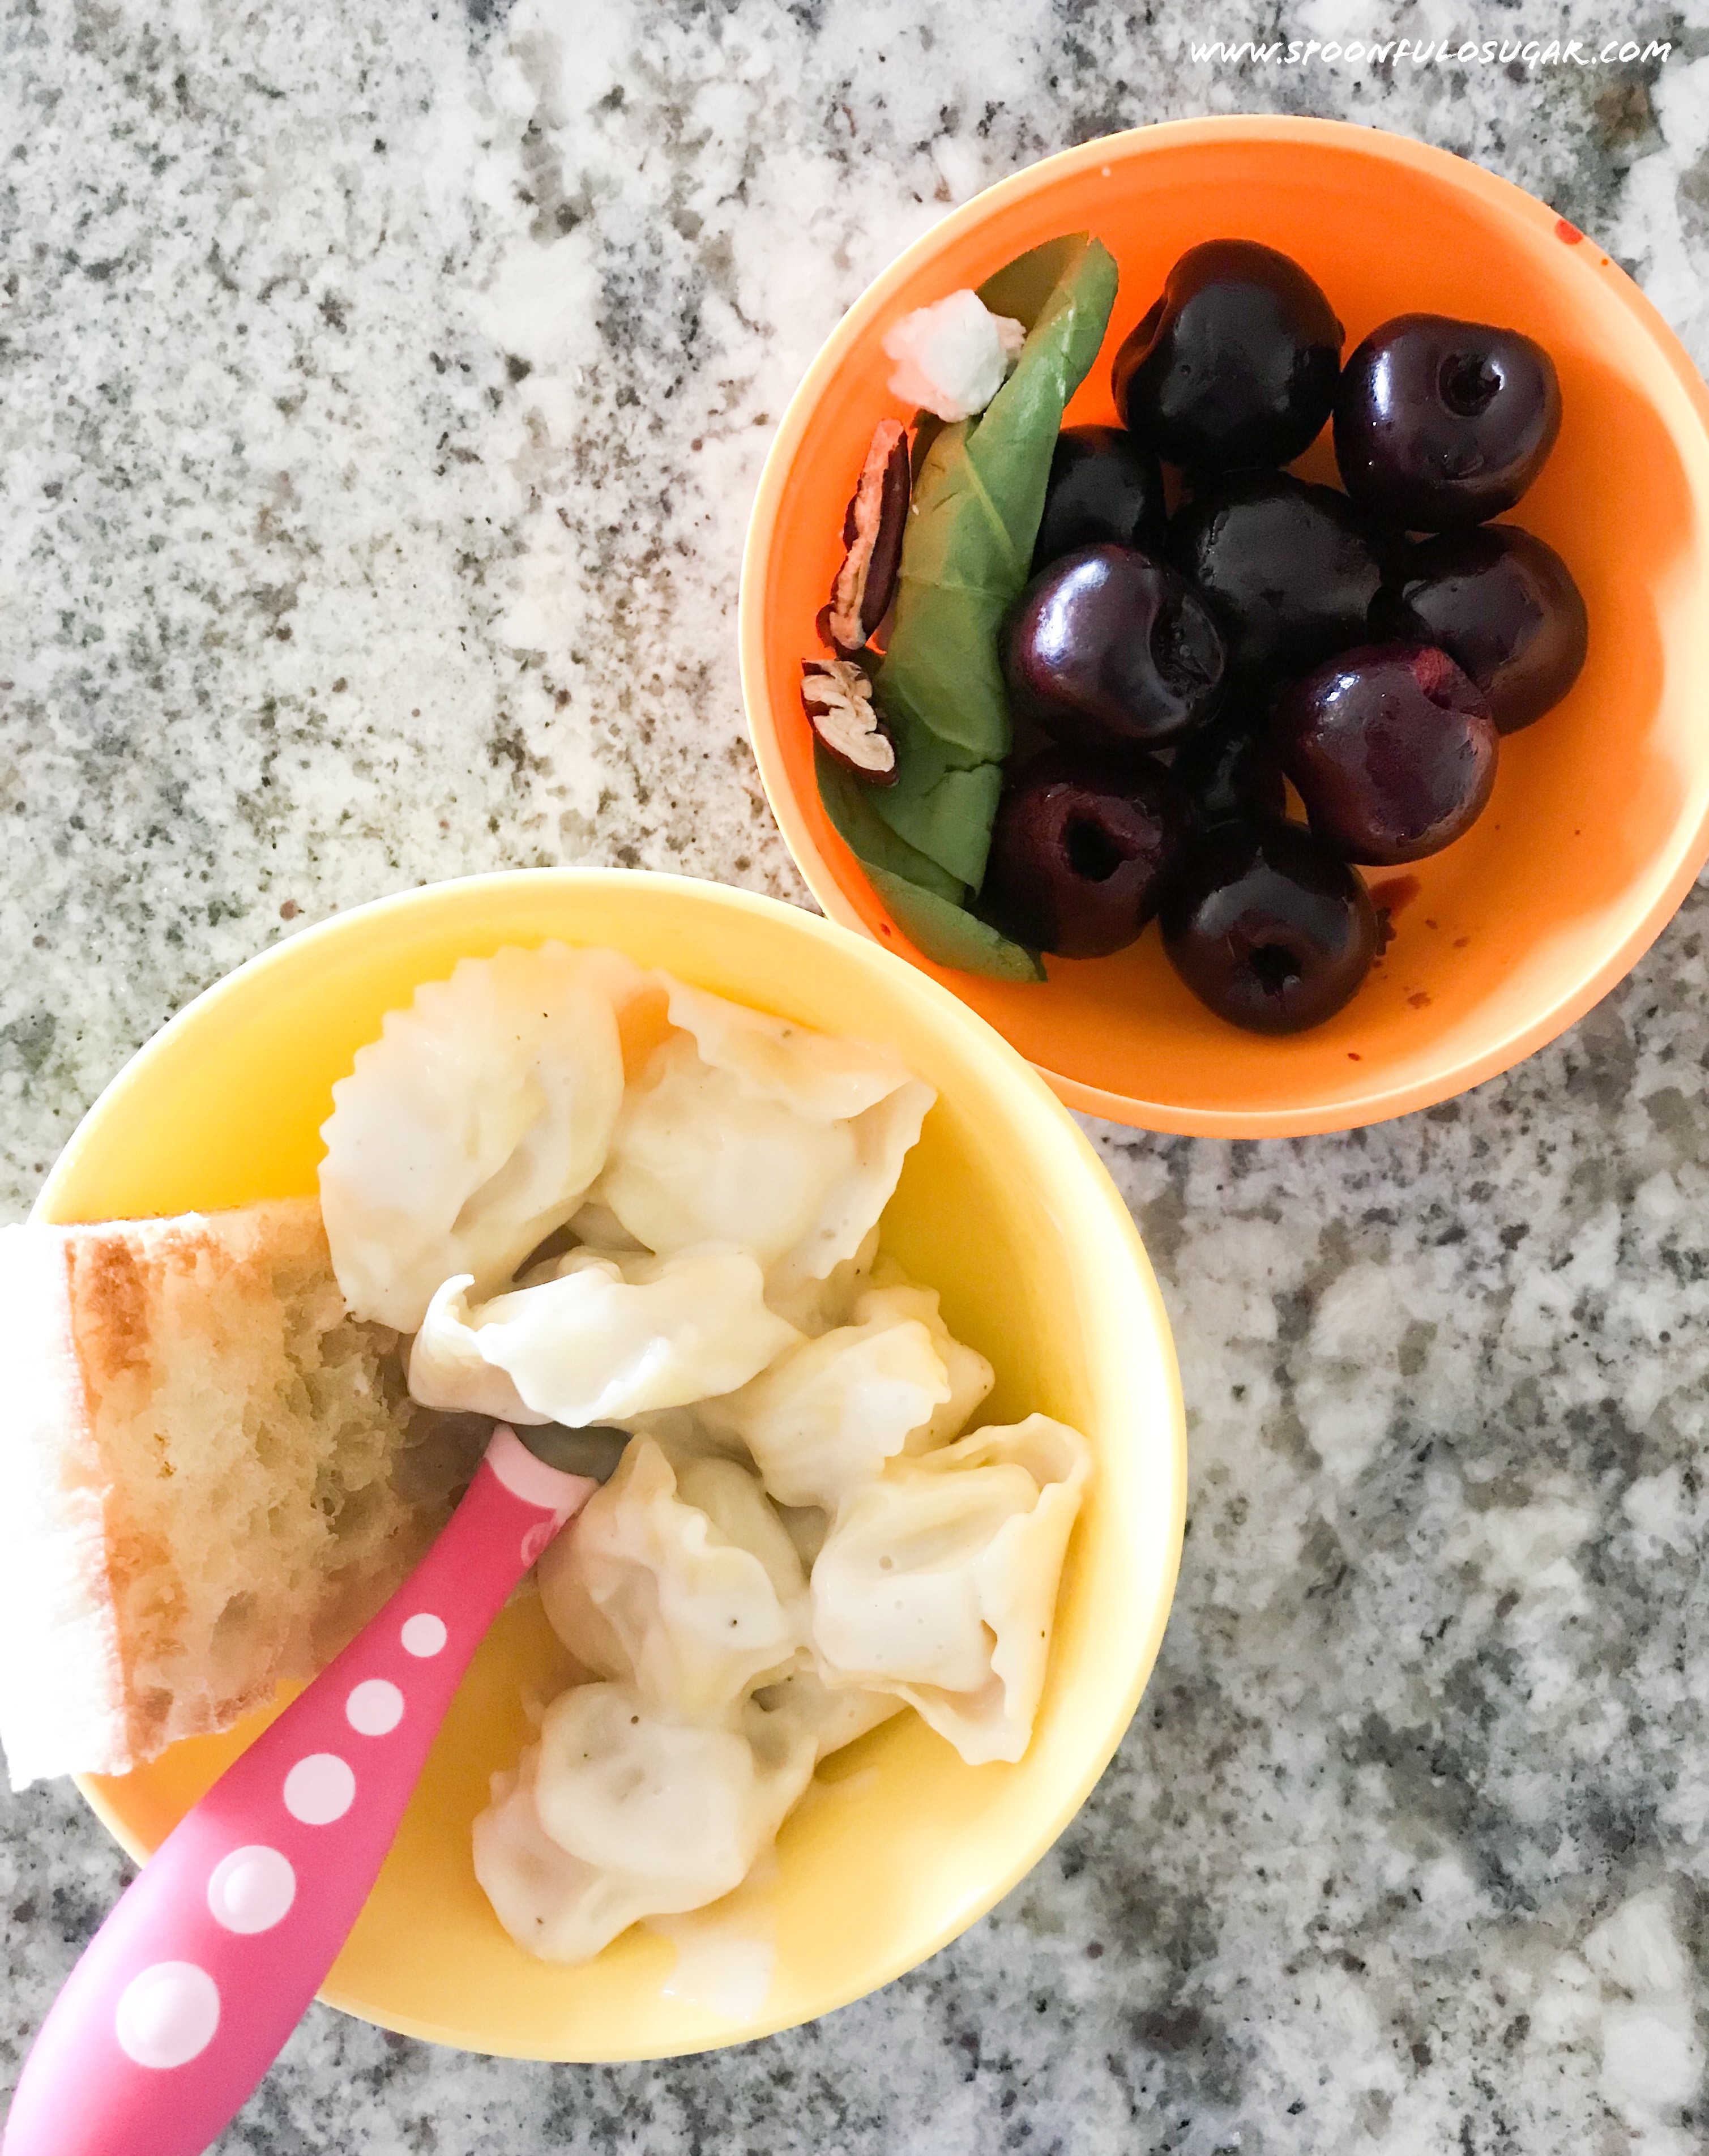 Five Family-Friendly Meals | Spoonful of Sugar